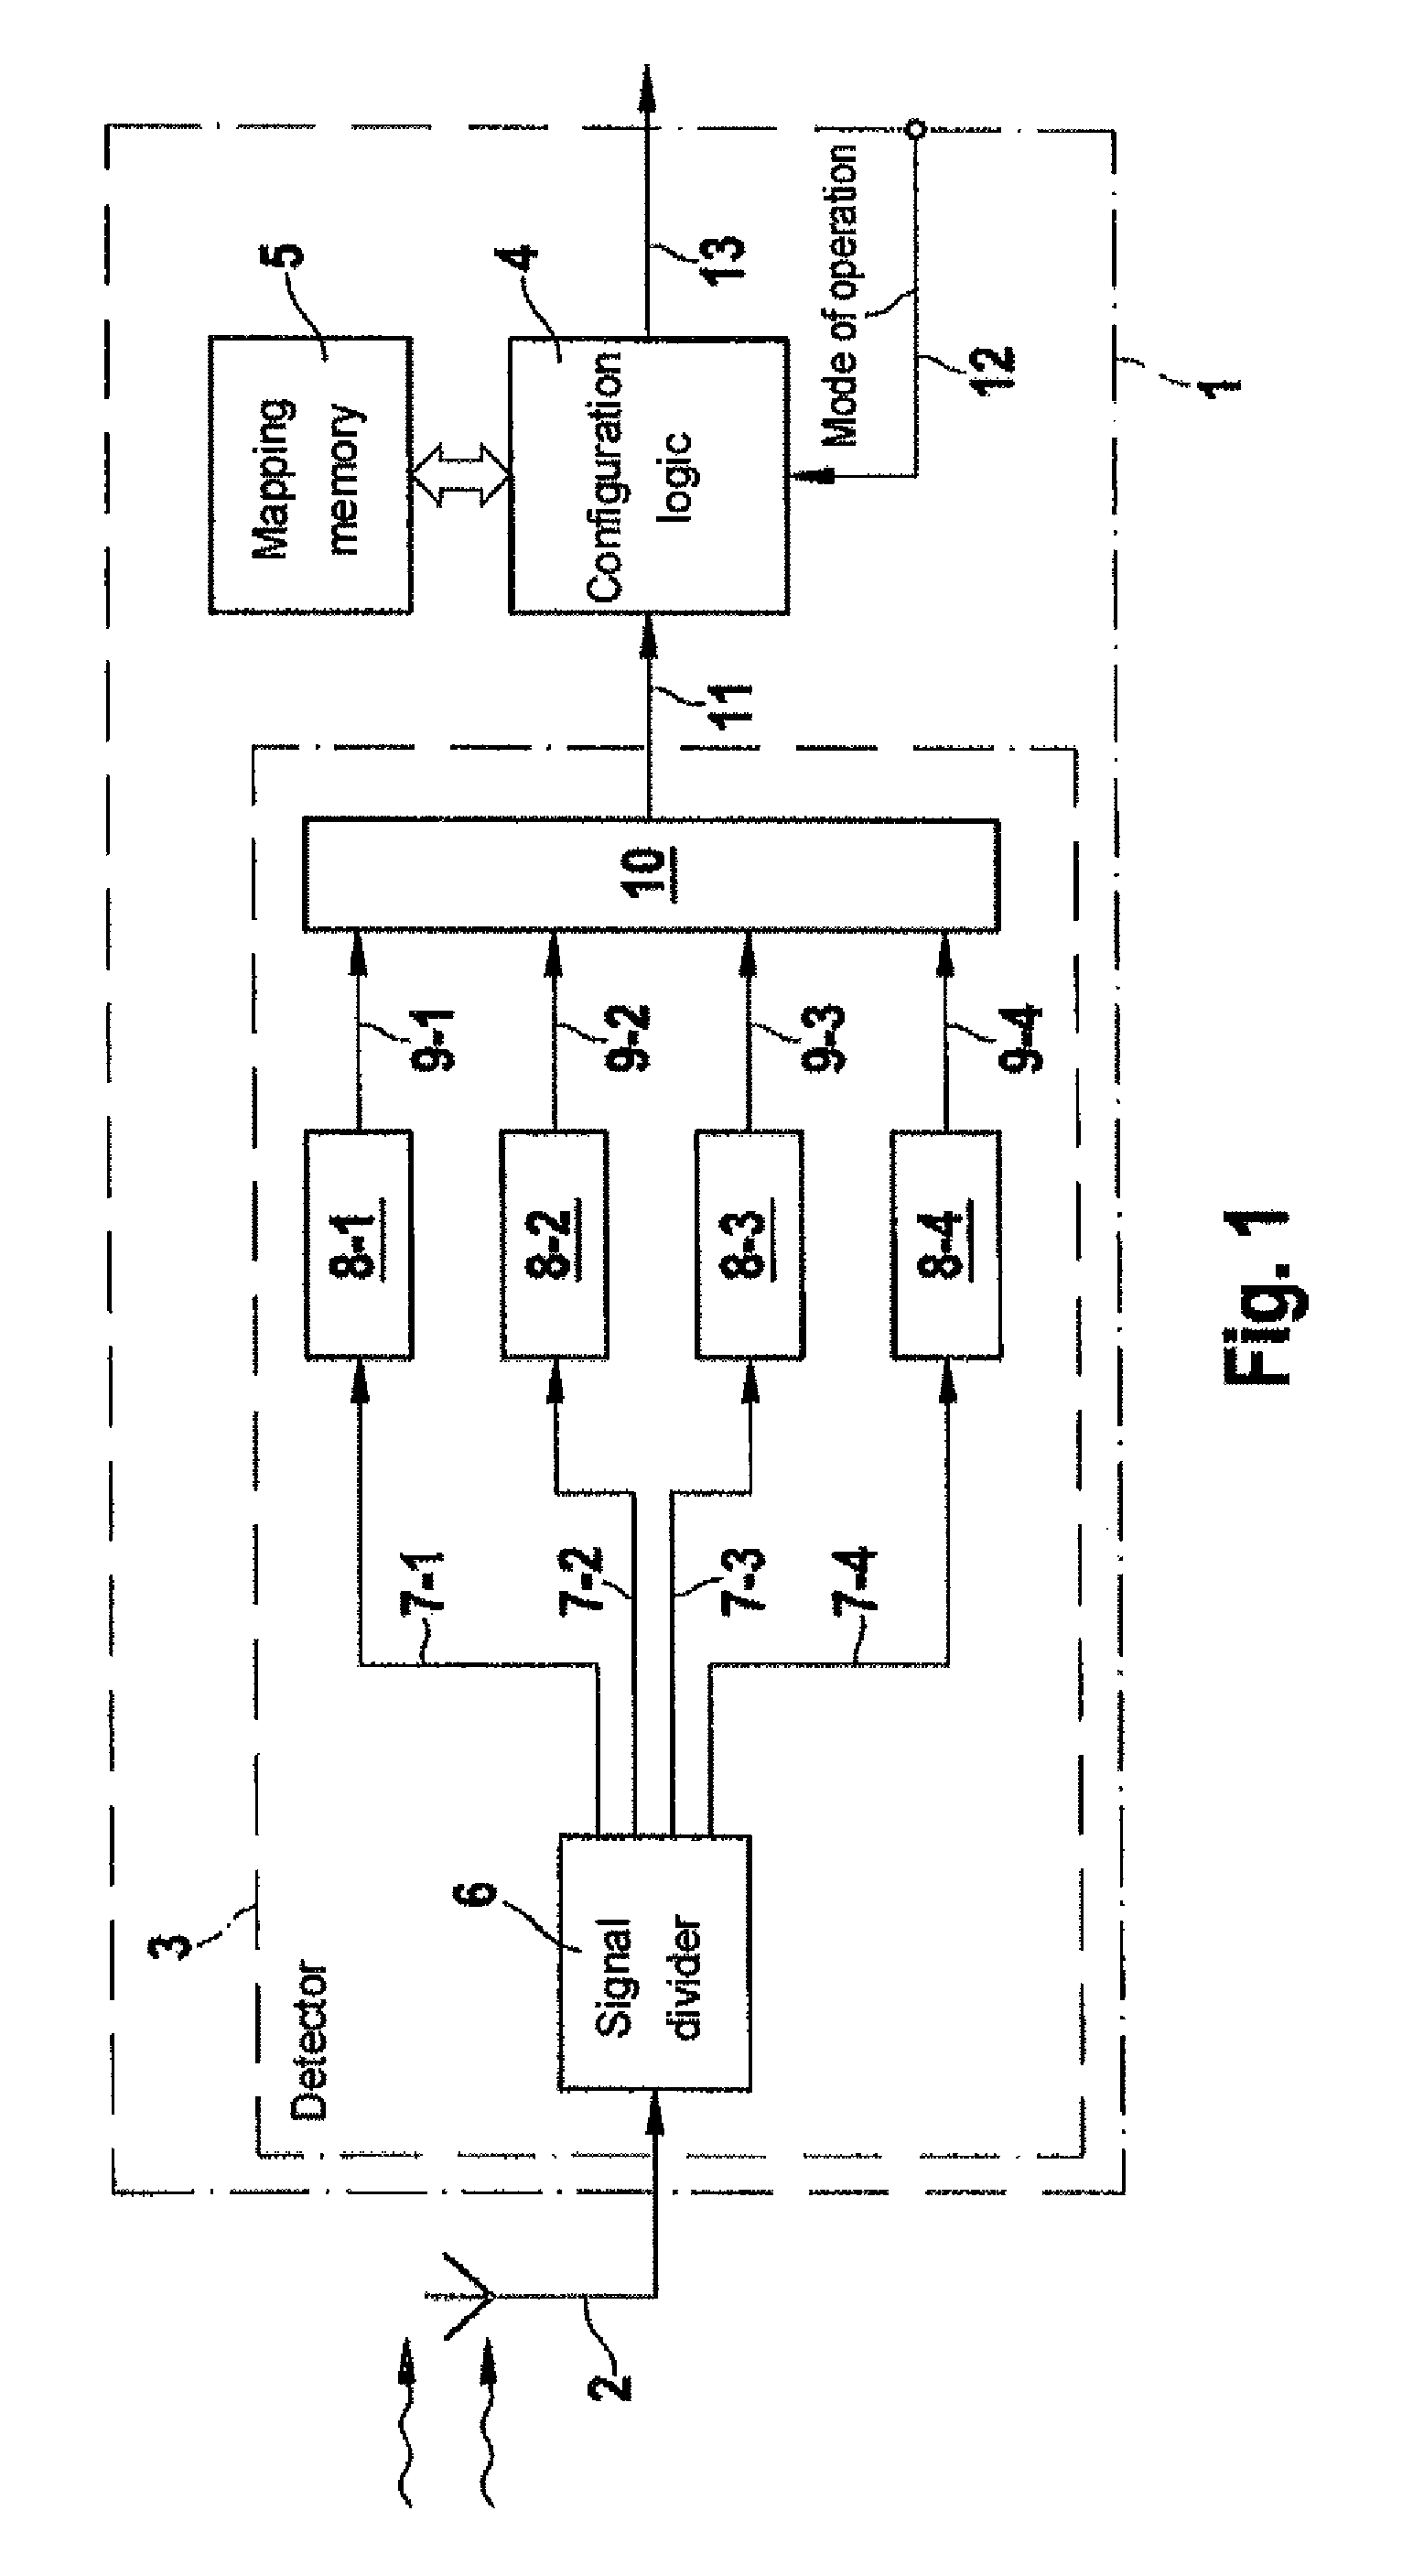 Apparatus and a method for detecting a communication channel